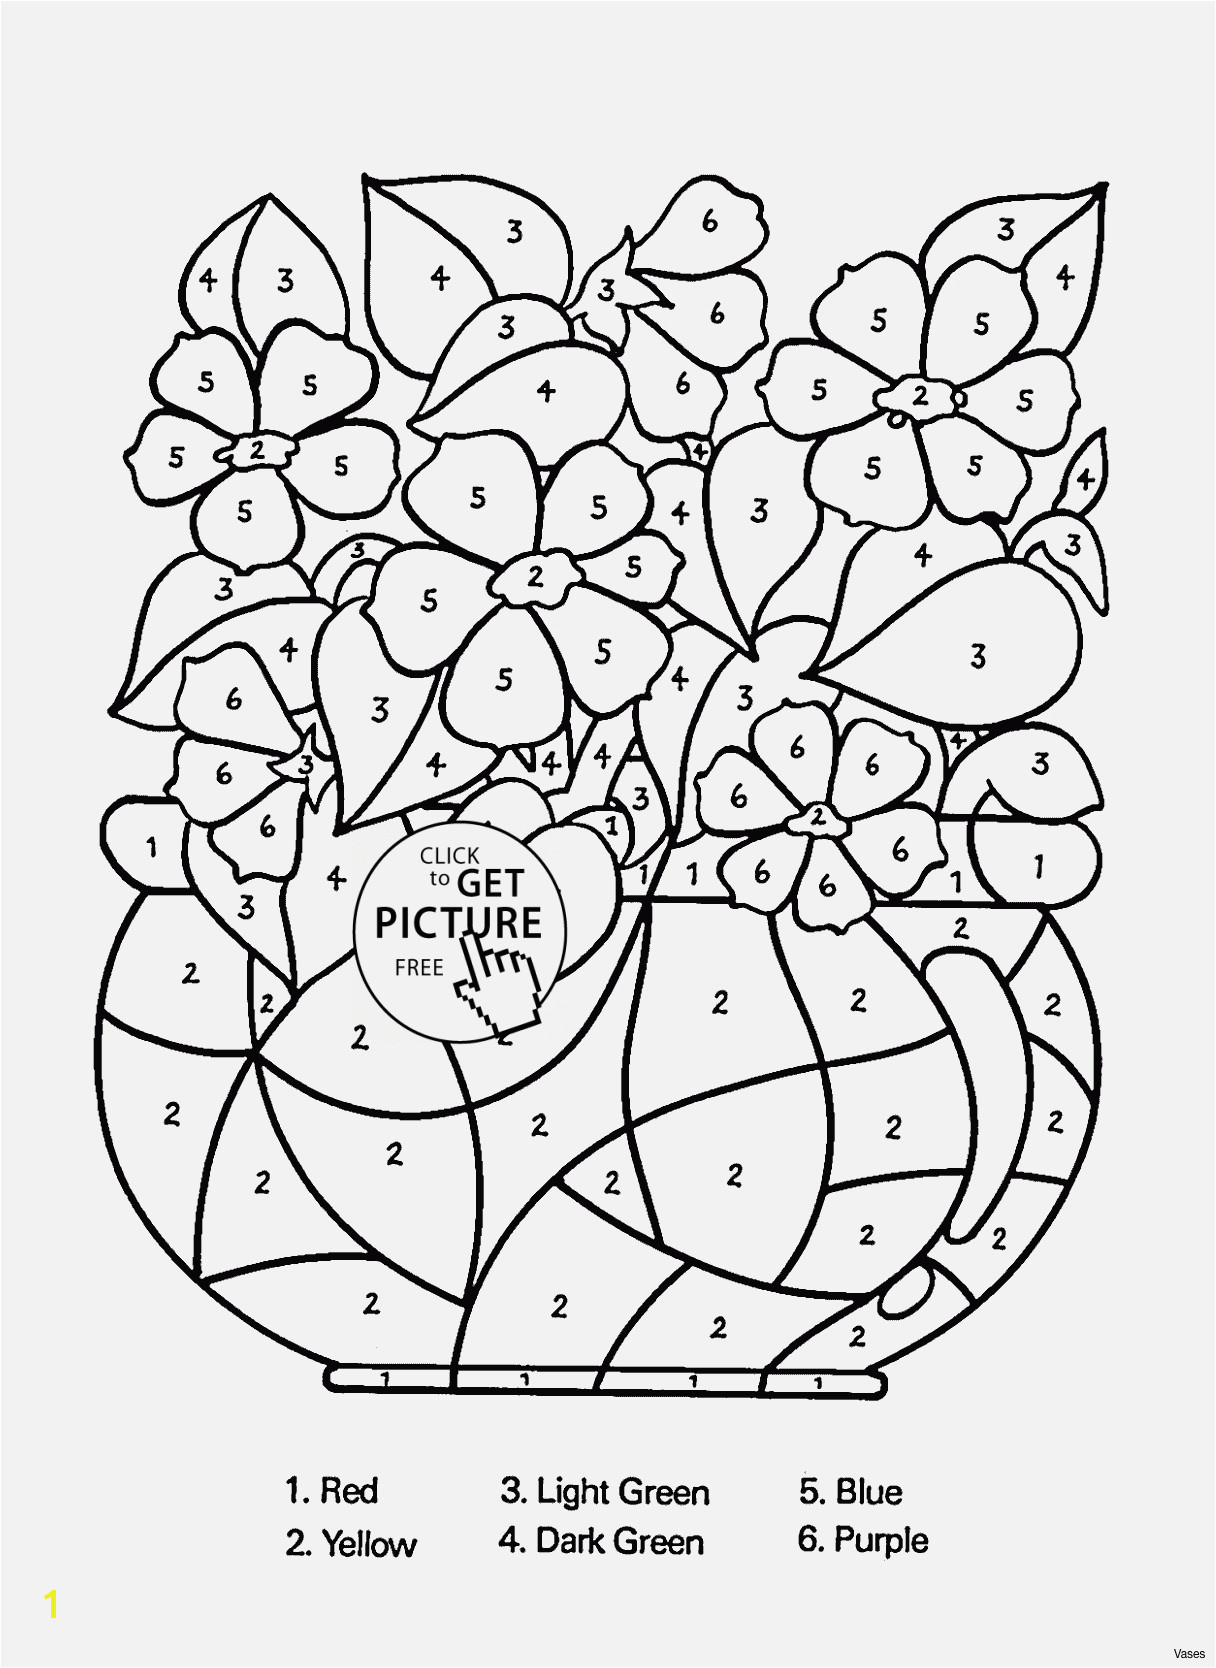 Eagle Coloring Pages Easy and Fun Awesome Fall Leaf Coloring Sheet Design Eagle Coloring Pages Eagle Coloring Pages Printable